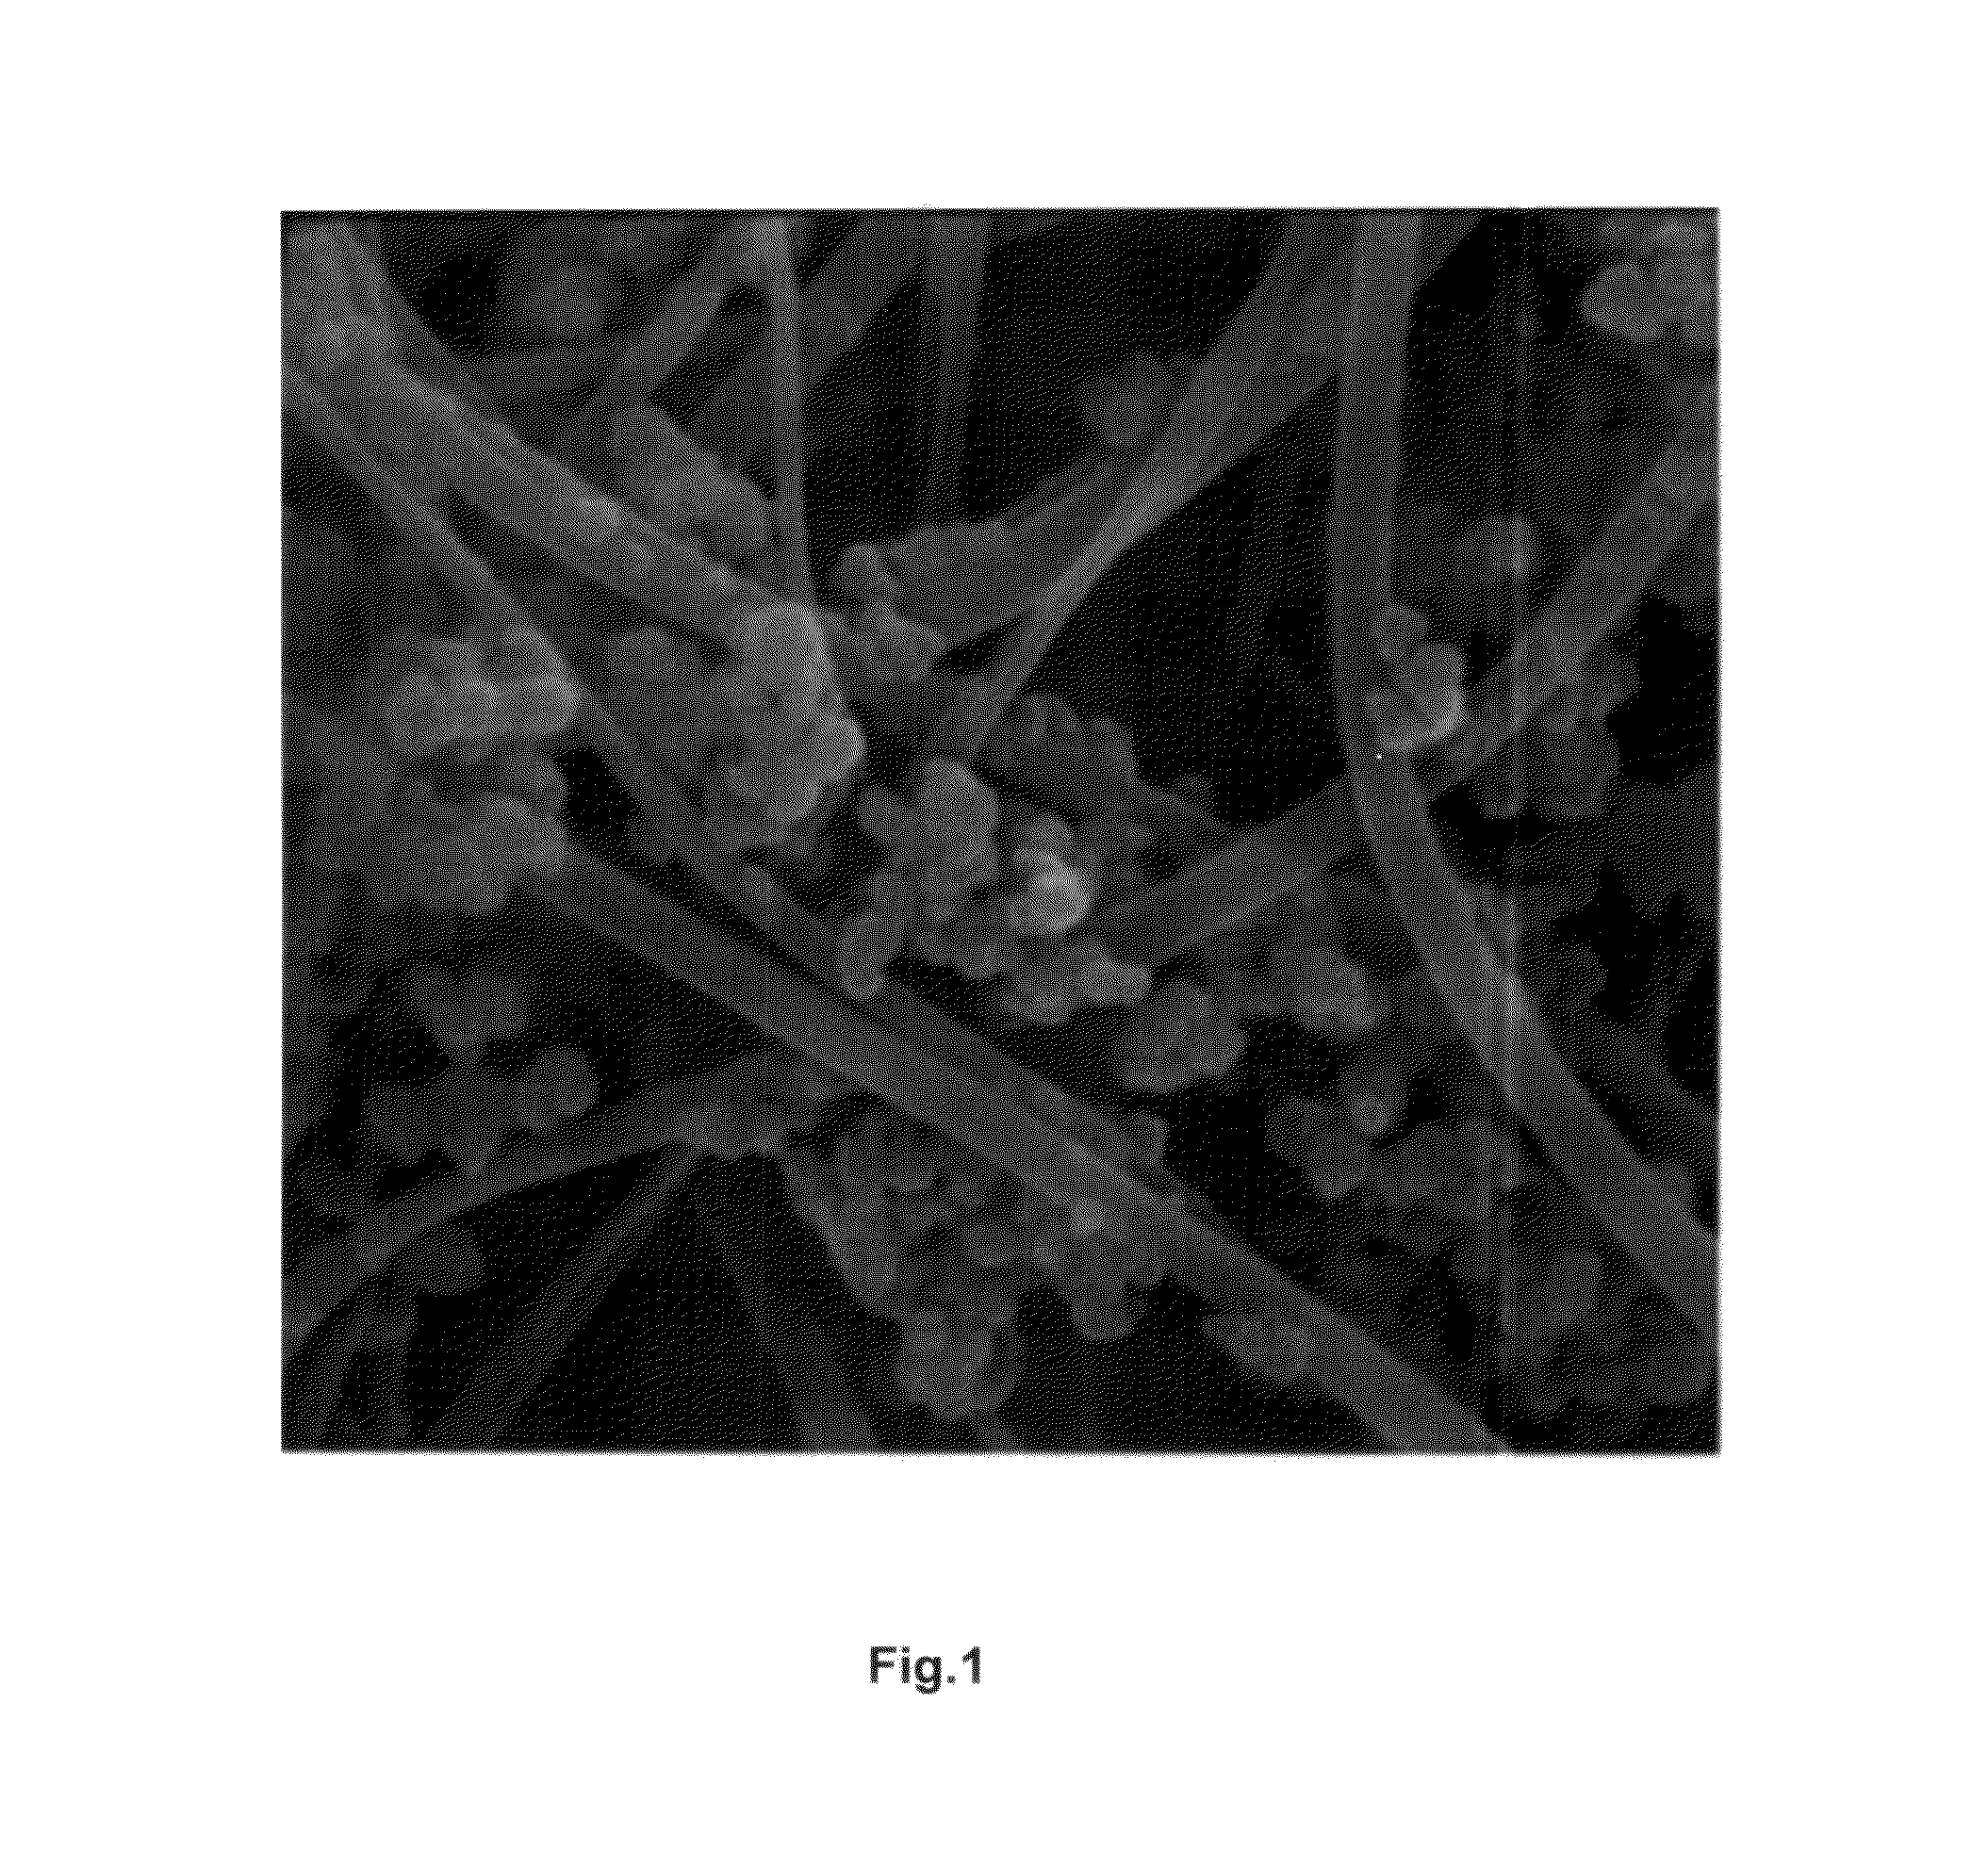 Non-woven polymeric fabric including agglomerates of aluminum hydroxide nano-fibers for filtering water